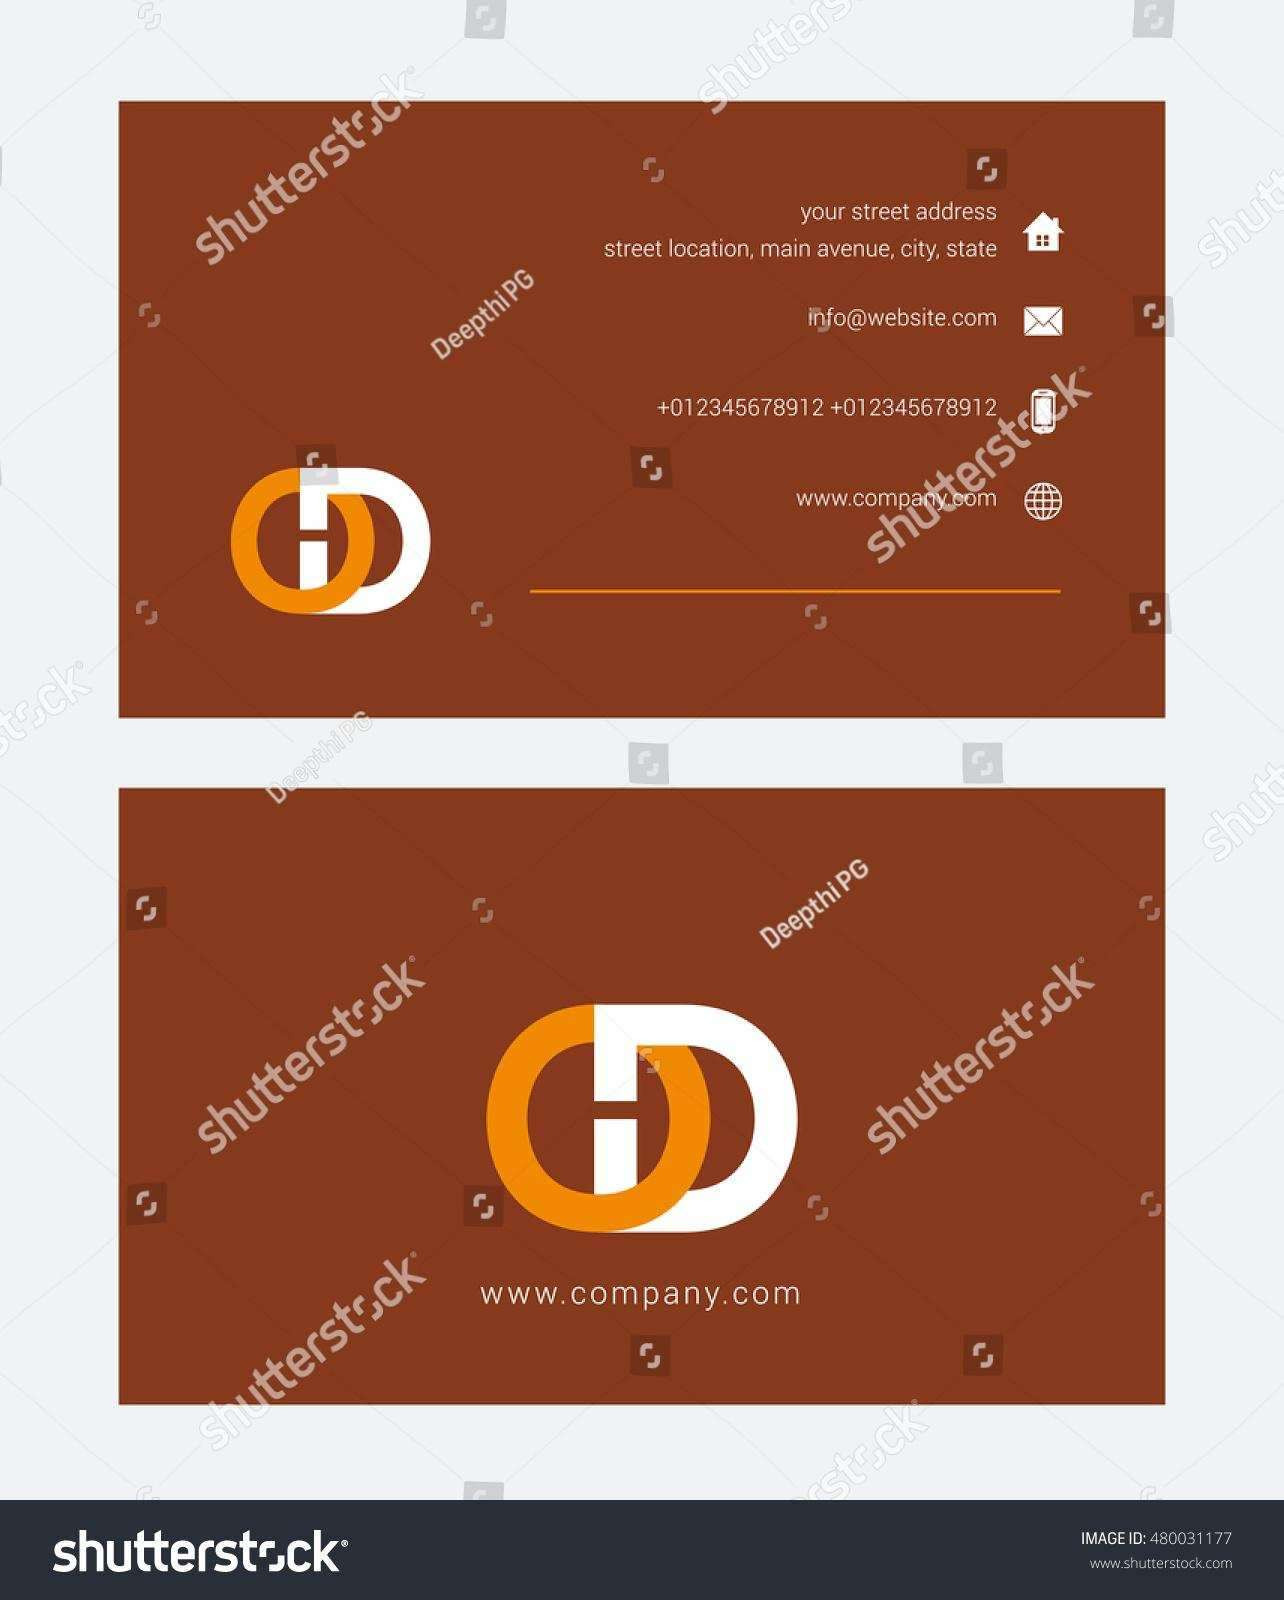 business card powerpoint templates free unique card template birthday card powerpoint template free birthday of business card powerpoint templates free